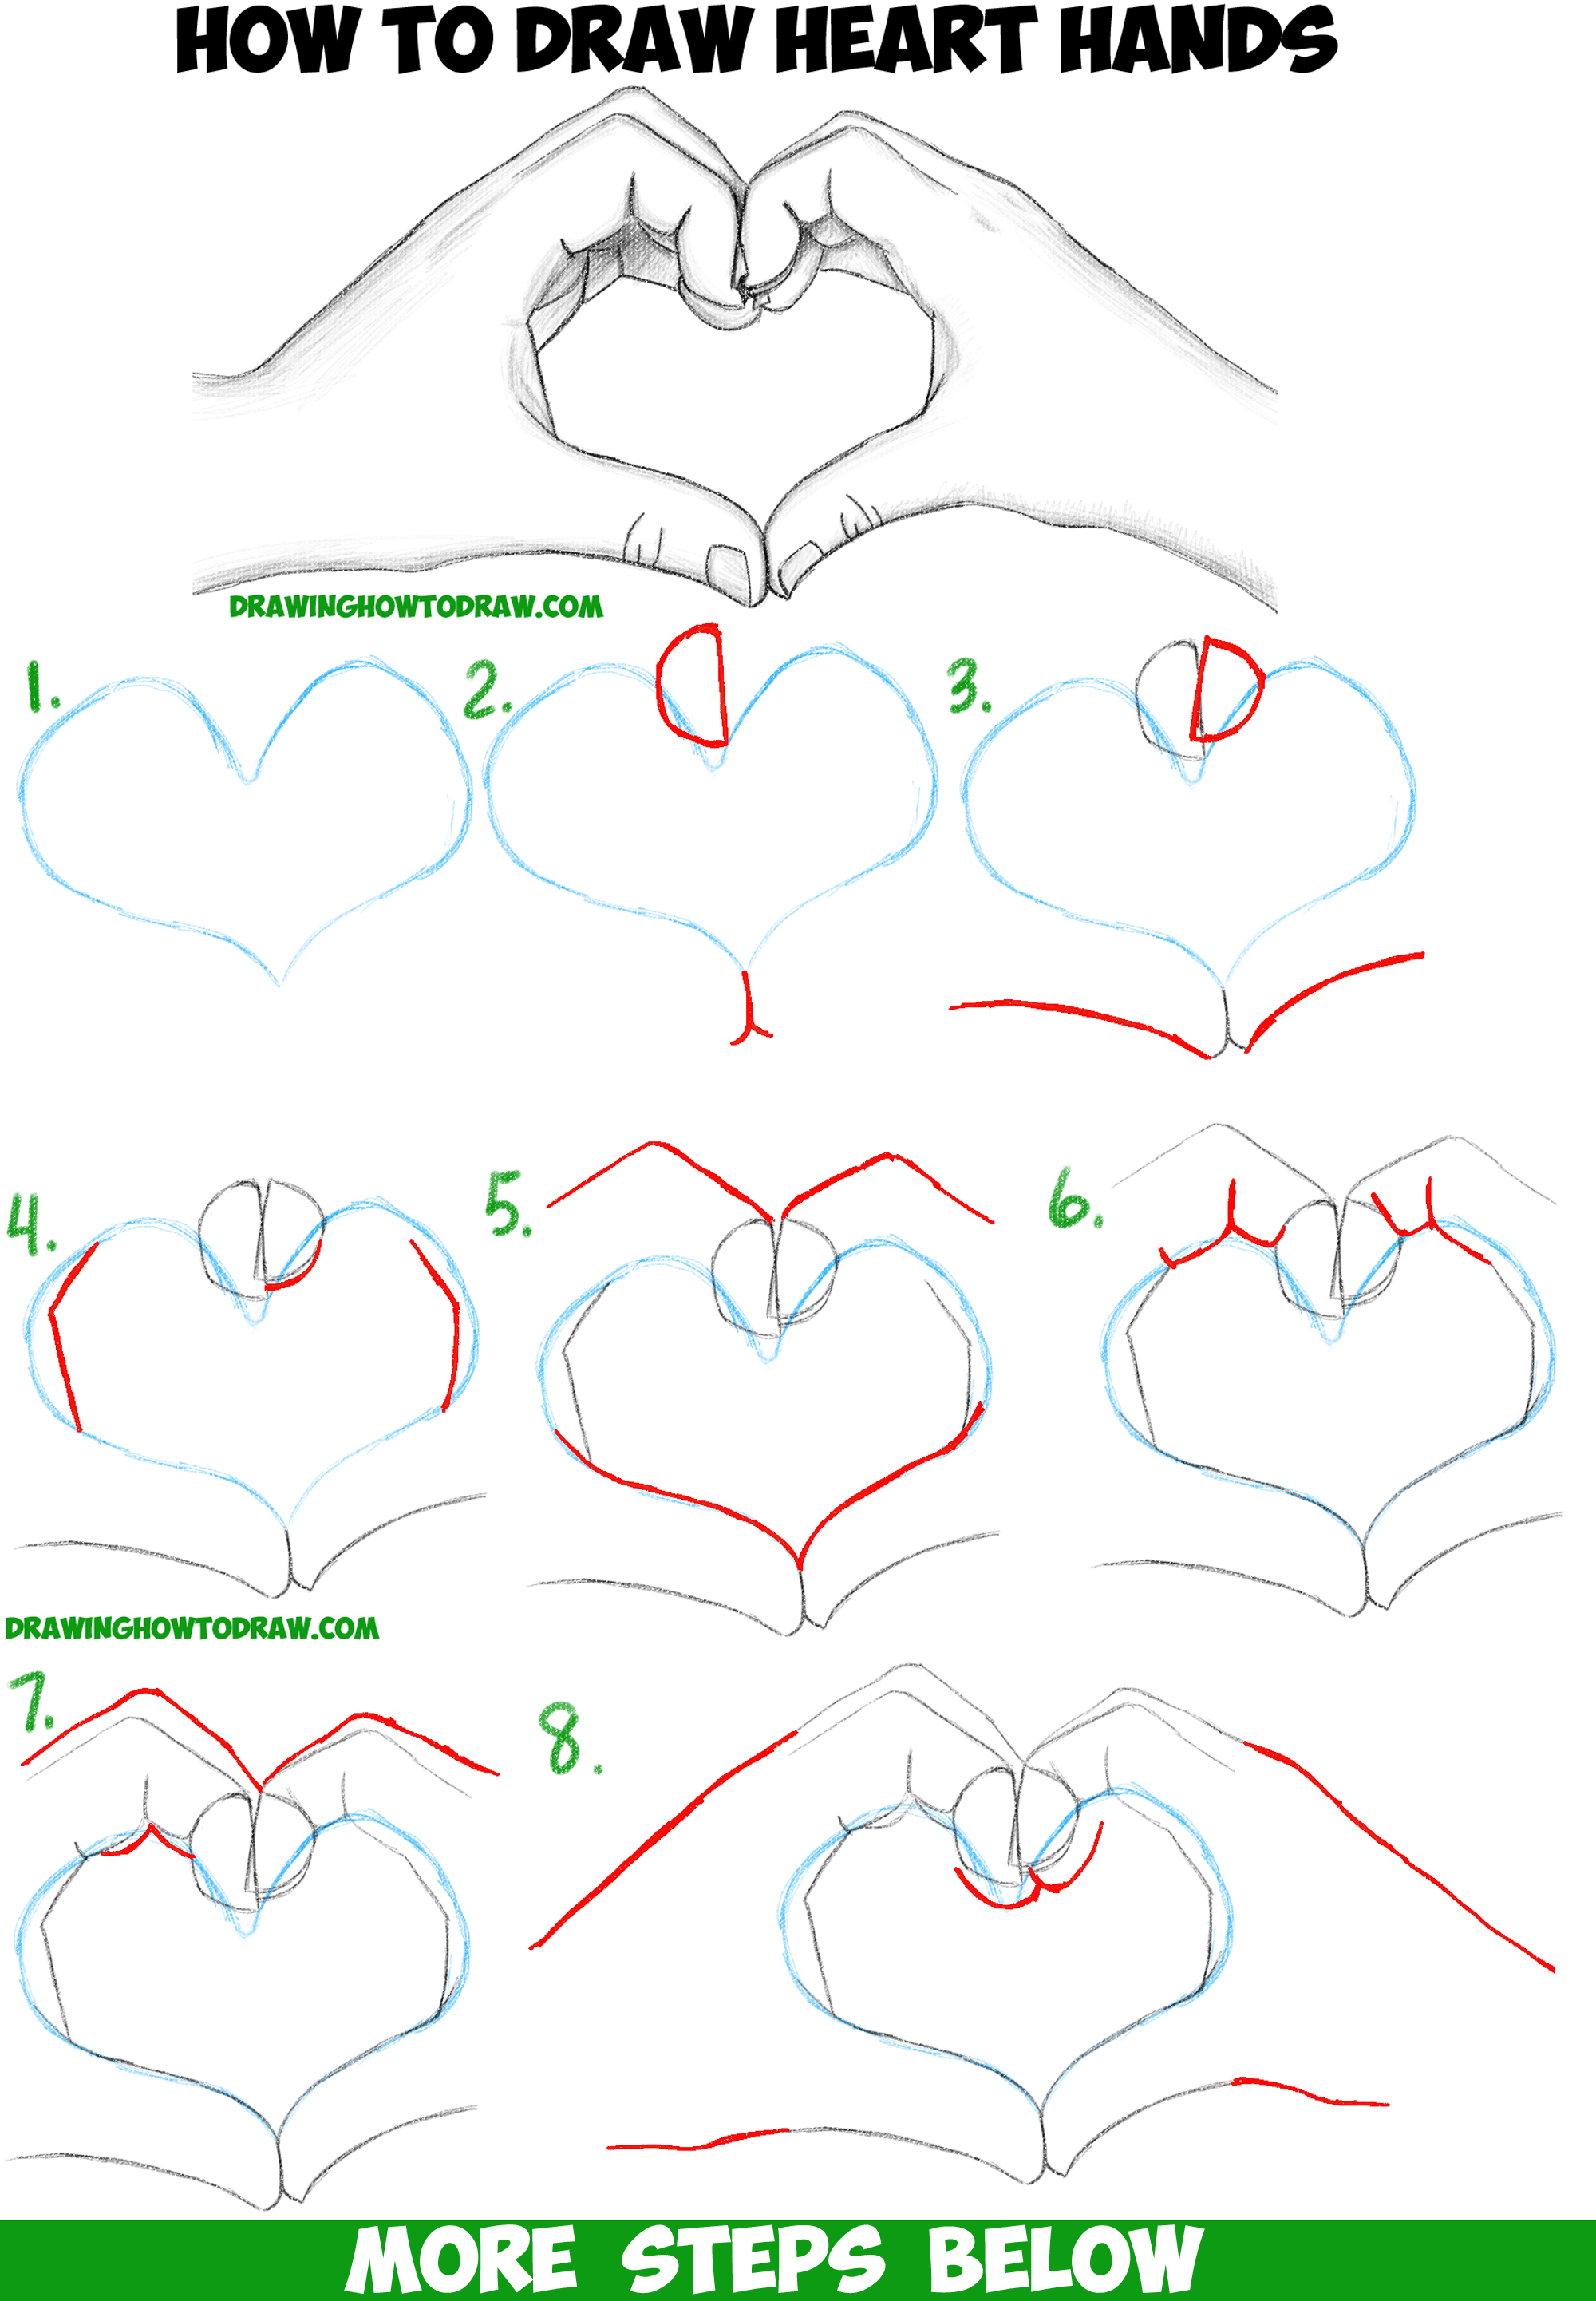 How to Draw Heart Hands in Easy to Follow Step by Step Drawing Tutorial